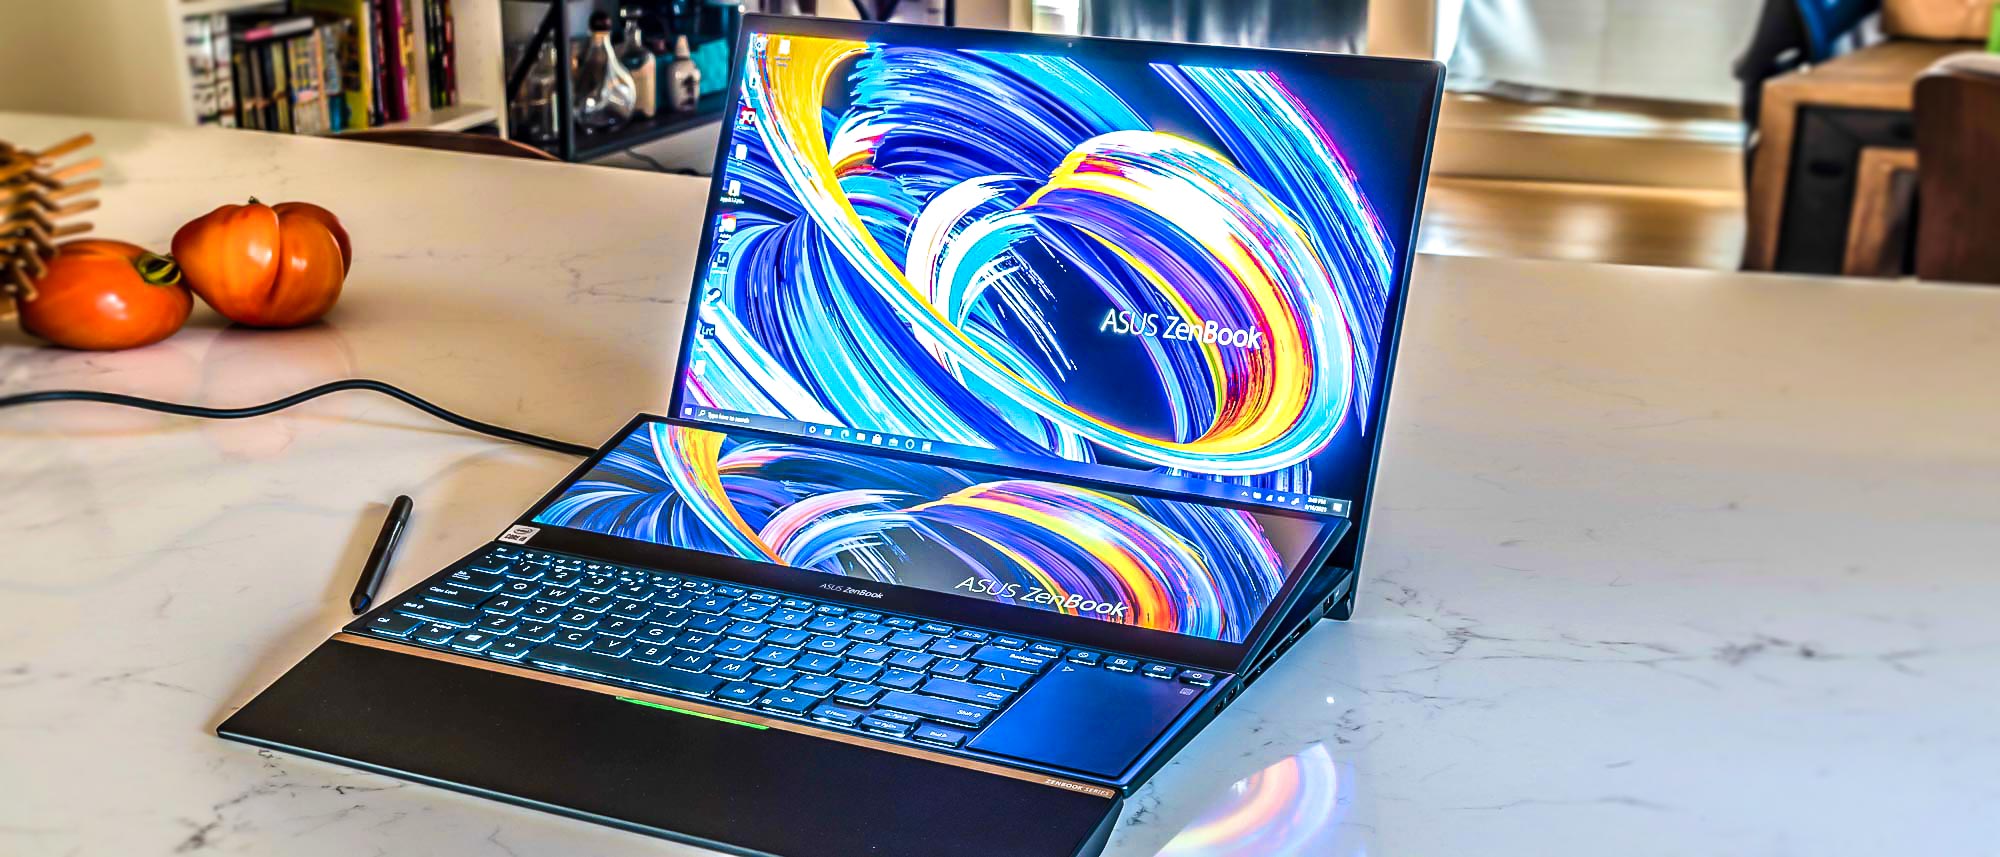 Asus Zenbook 15 OLED review: Widescreen entertainment - Can Buy or Not